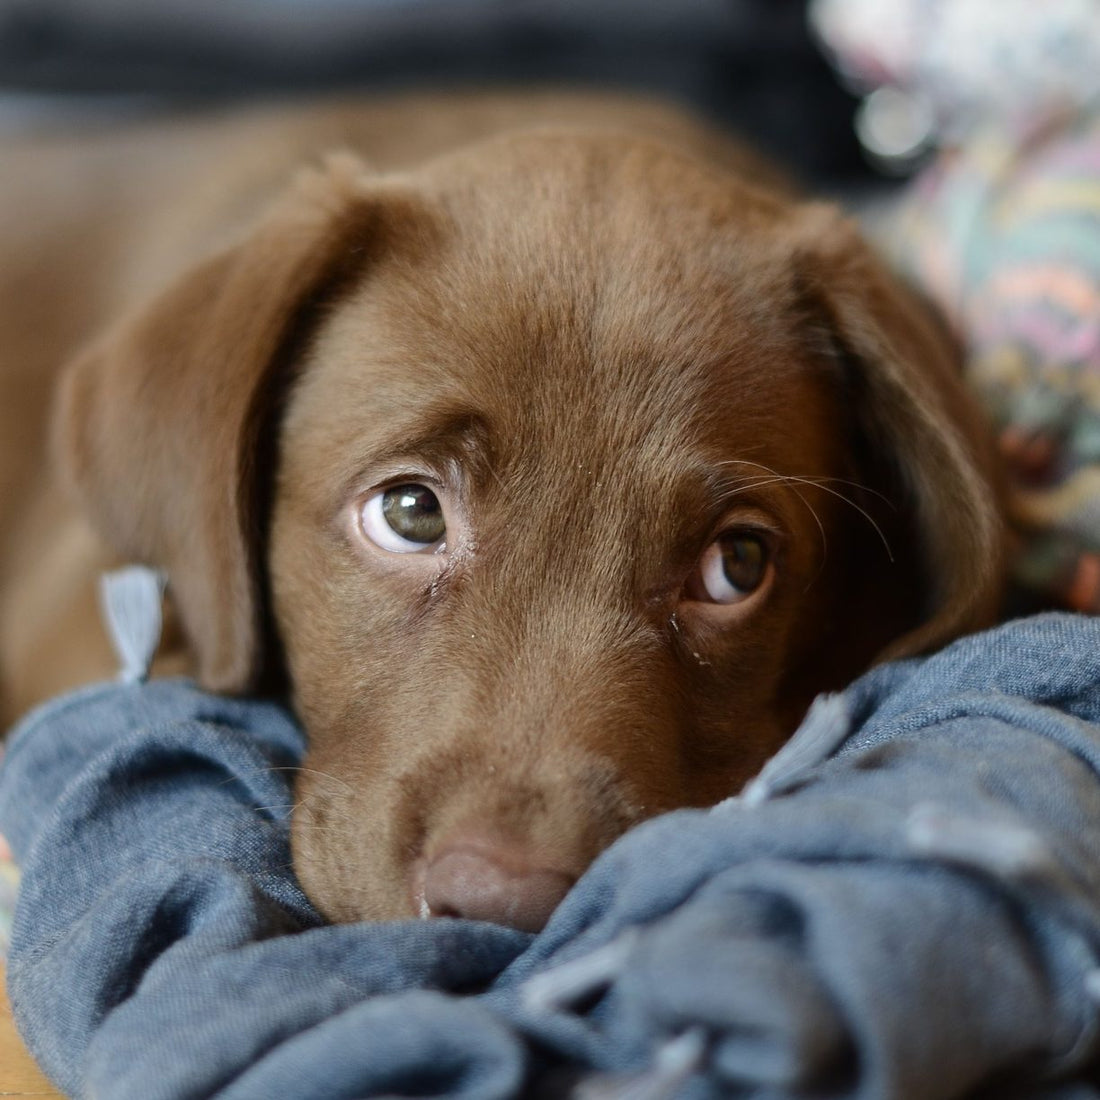 Here's What You Need To Know If Your Dogs Struggle With Upset Stomachs